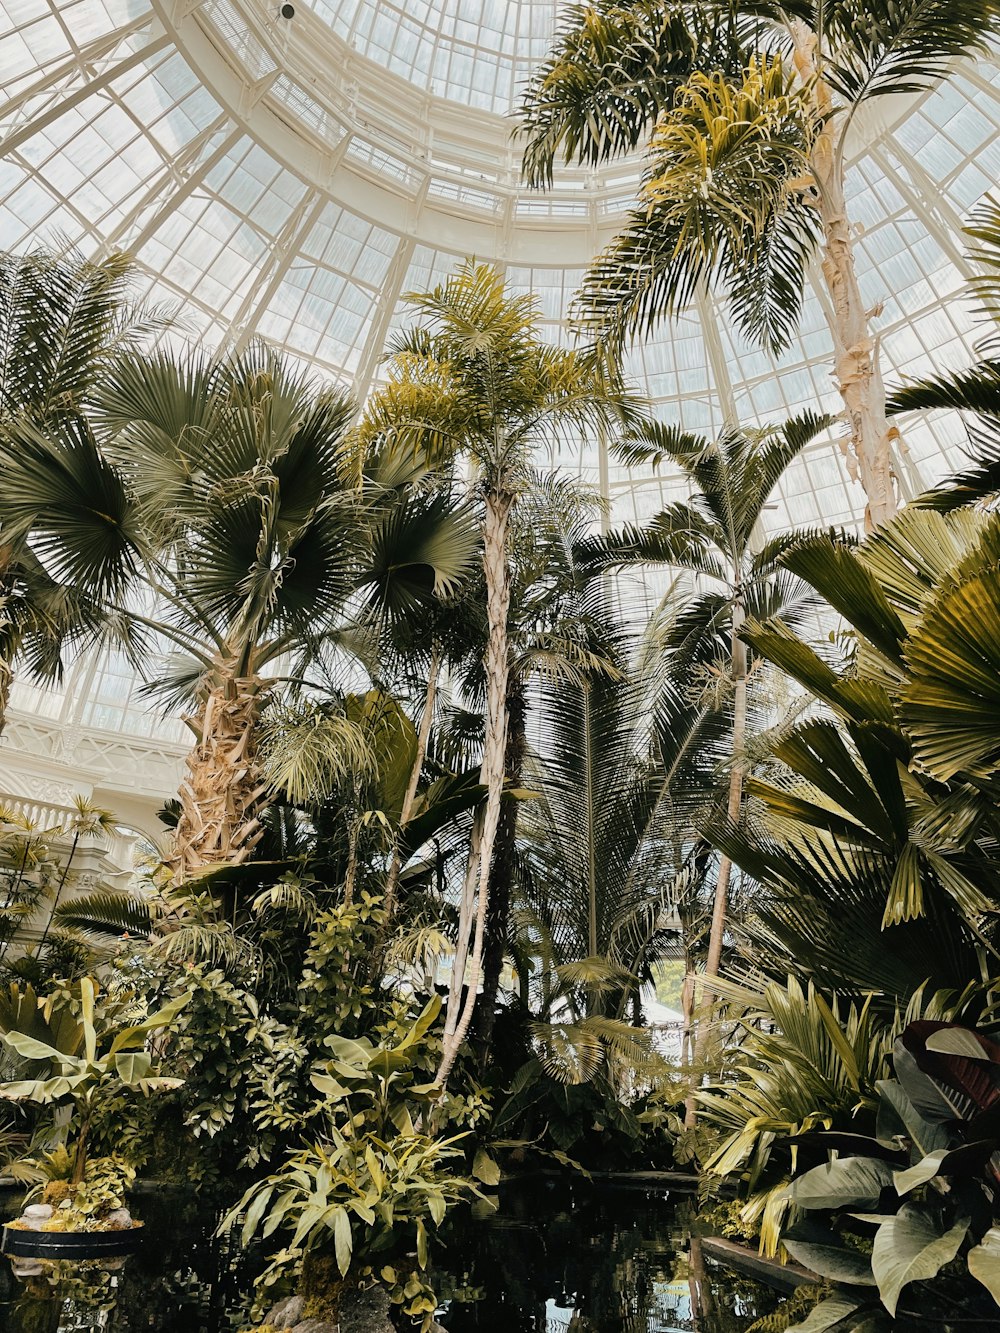 palm trees and other tropical plants in a greenhouse